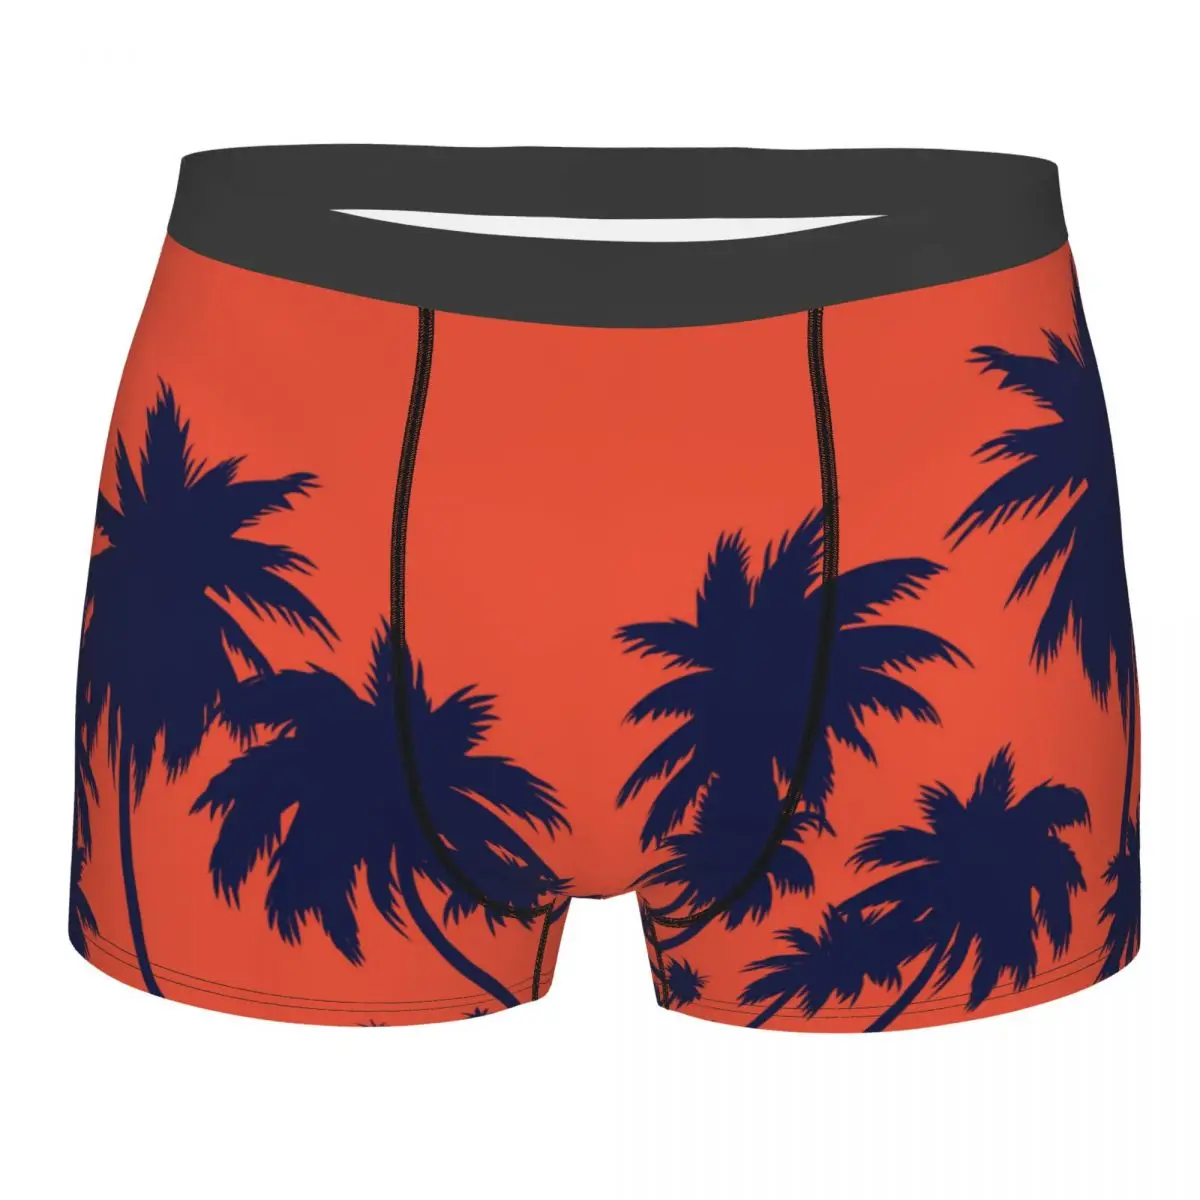 

Men's Panties Underpants Boxers Underwear Dark Palm Trees At Sunset Sexy Male Shorts